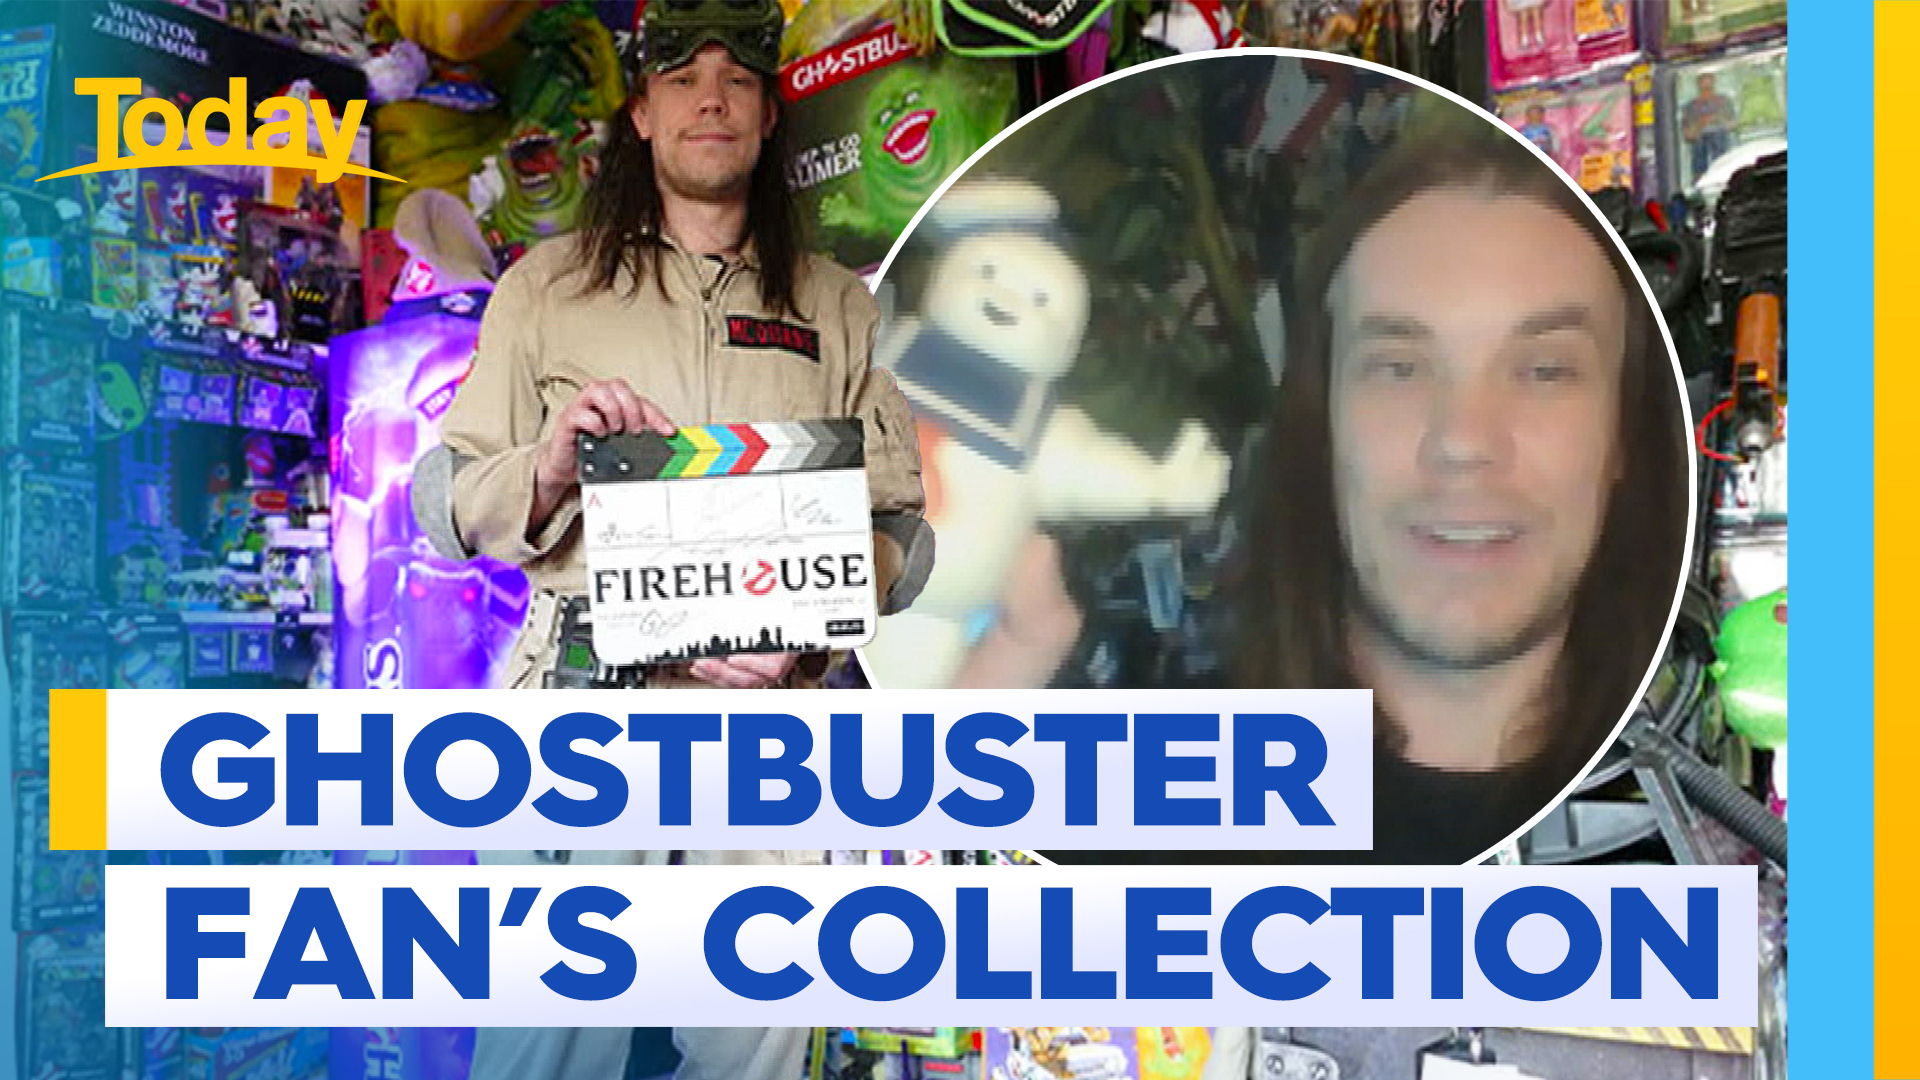 Ghostbusters fan shows off impressive collection